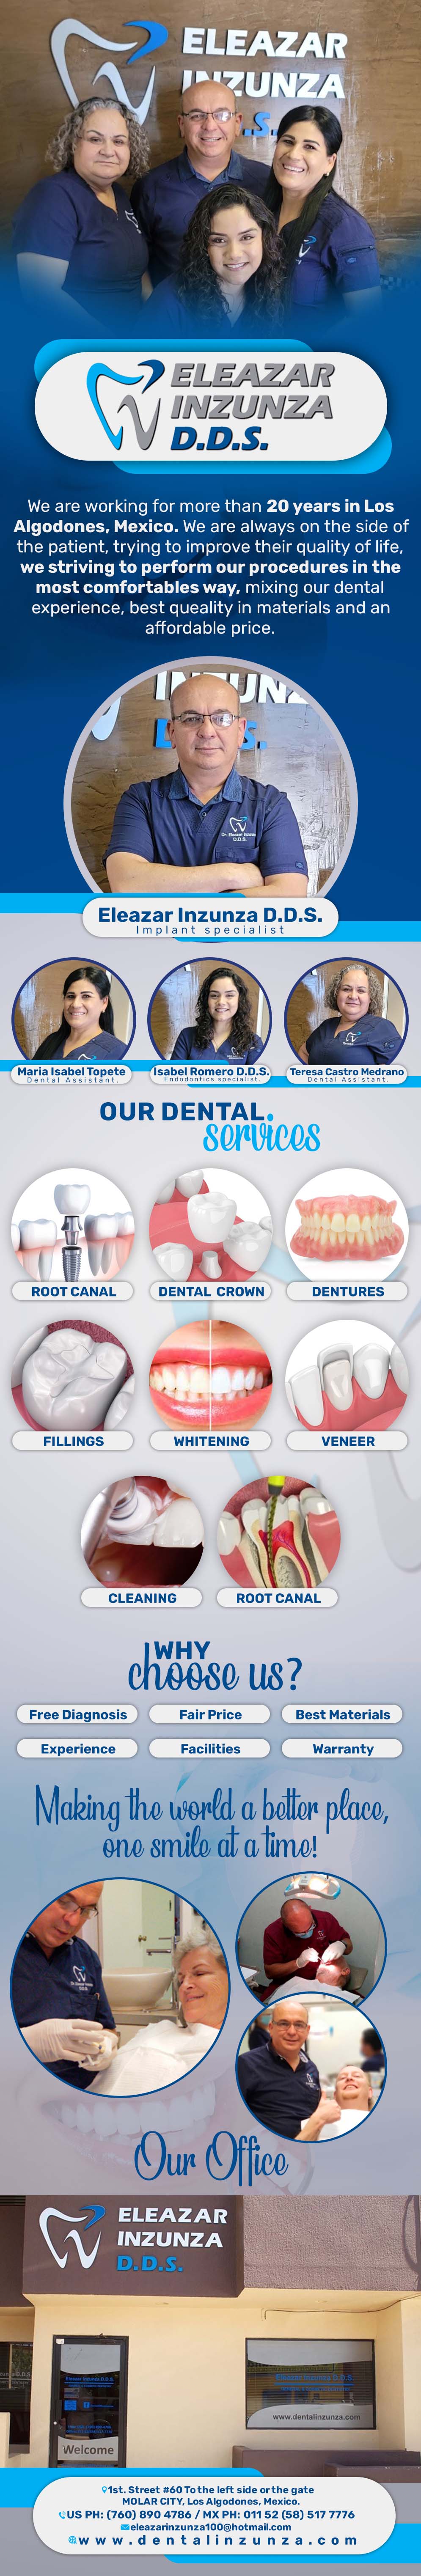 DENTAL OFFICE INZUNZA Eleazar Inzunza DDS-General Dentistry and Specialists We offer complete dental services including general dentistry, cosmetic dentistry, periodontics, endodontics, orthodontics and dental implants. Bridges °X-Rays °Porcelain Veneers °Metal Crowns °Dental Bonding °Deep Cleaning °Denture Repair °Traditional Acrylic Dentures °Prescriptions °Root Canals °Metal Bridges °White Fillings °Root Canal Therapy Relines (Hard or Soft) °General Oral Surgeries °Porcelain Crowns °Flexible Partials °Composite Posts °Teeth Whitening         